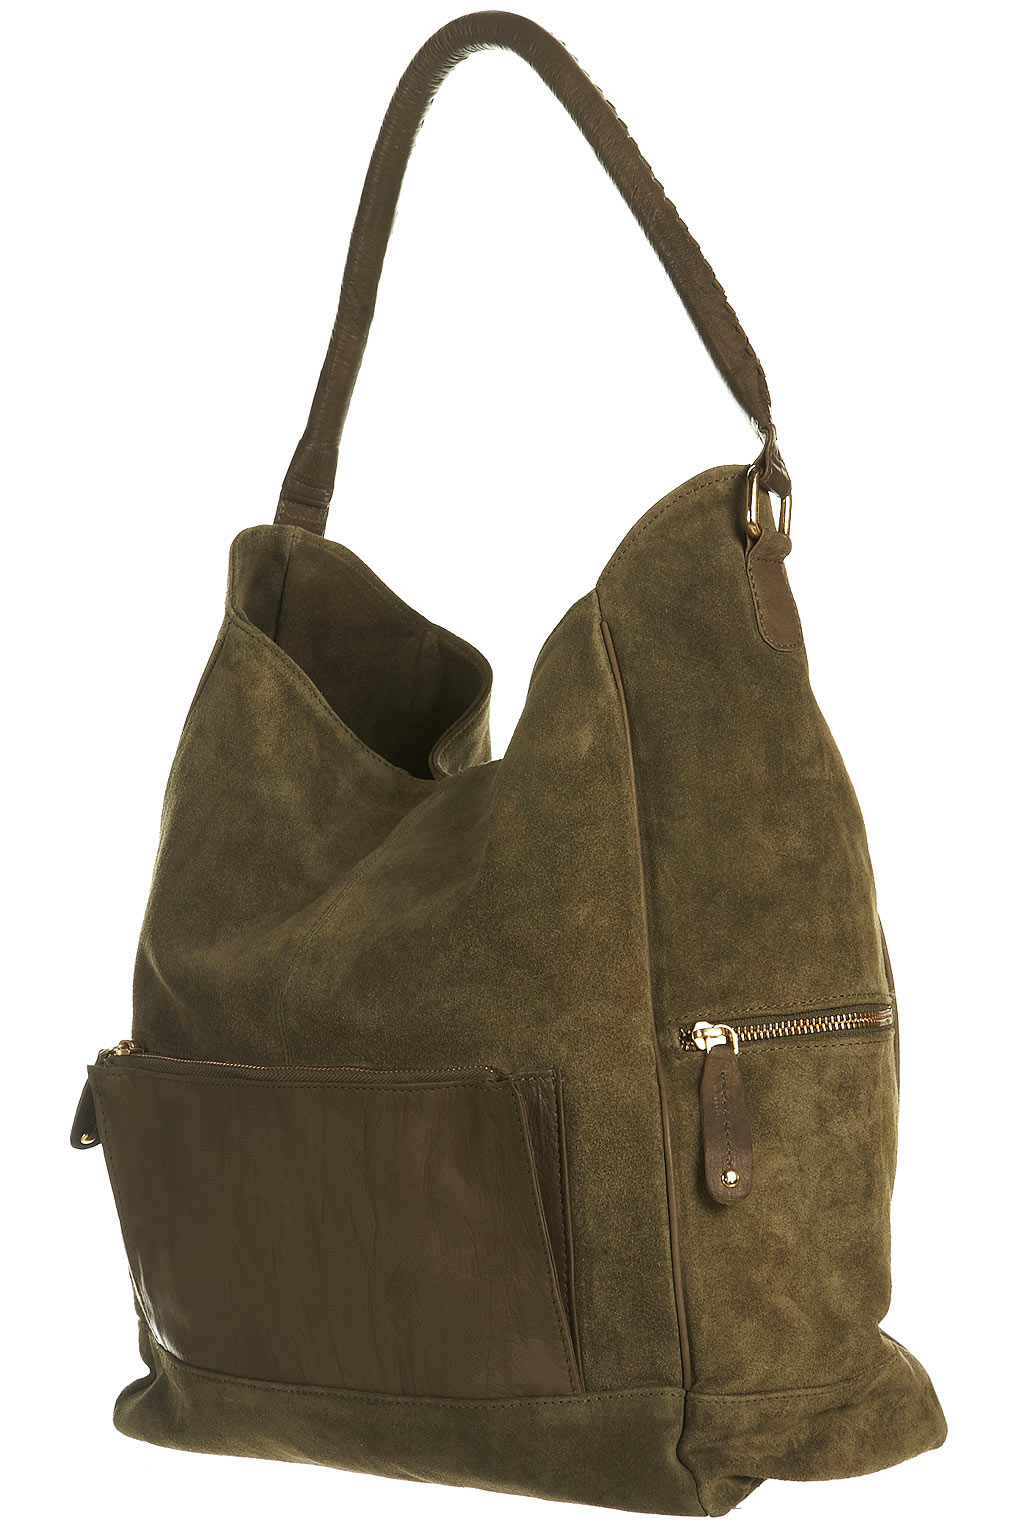 Lyst - TOPSHOP Suede and Leather Shoulder Bag in Natural